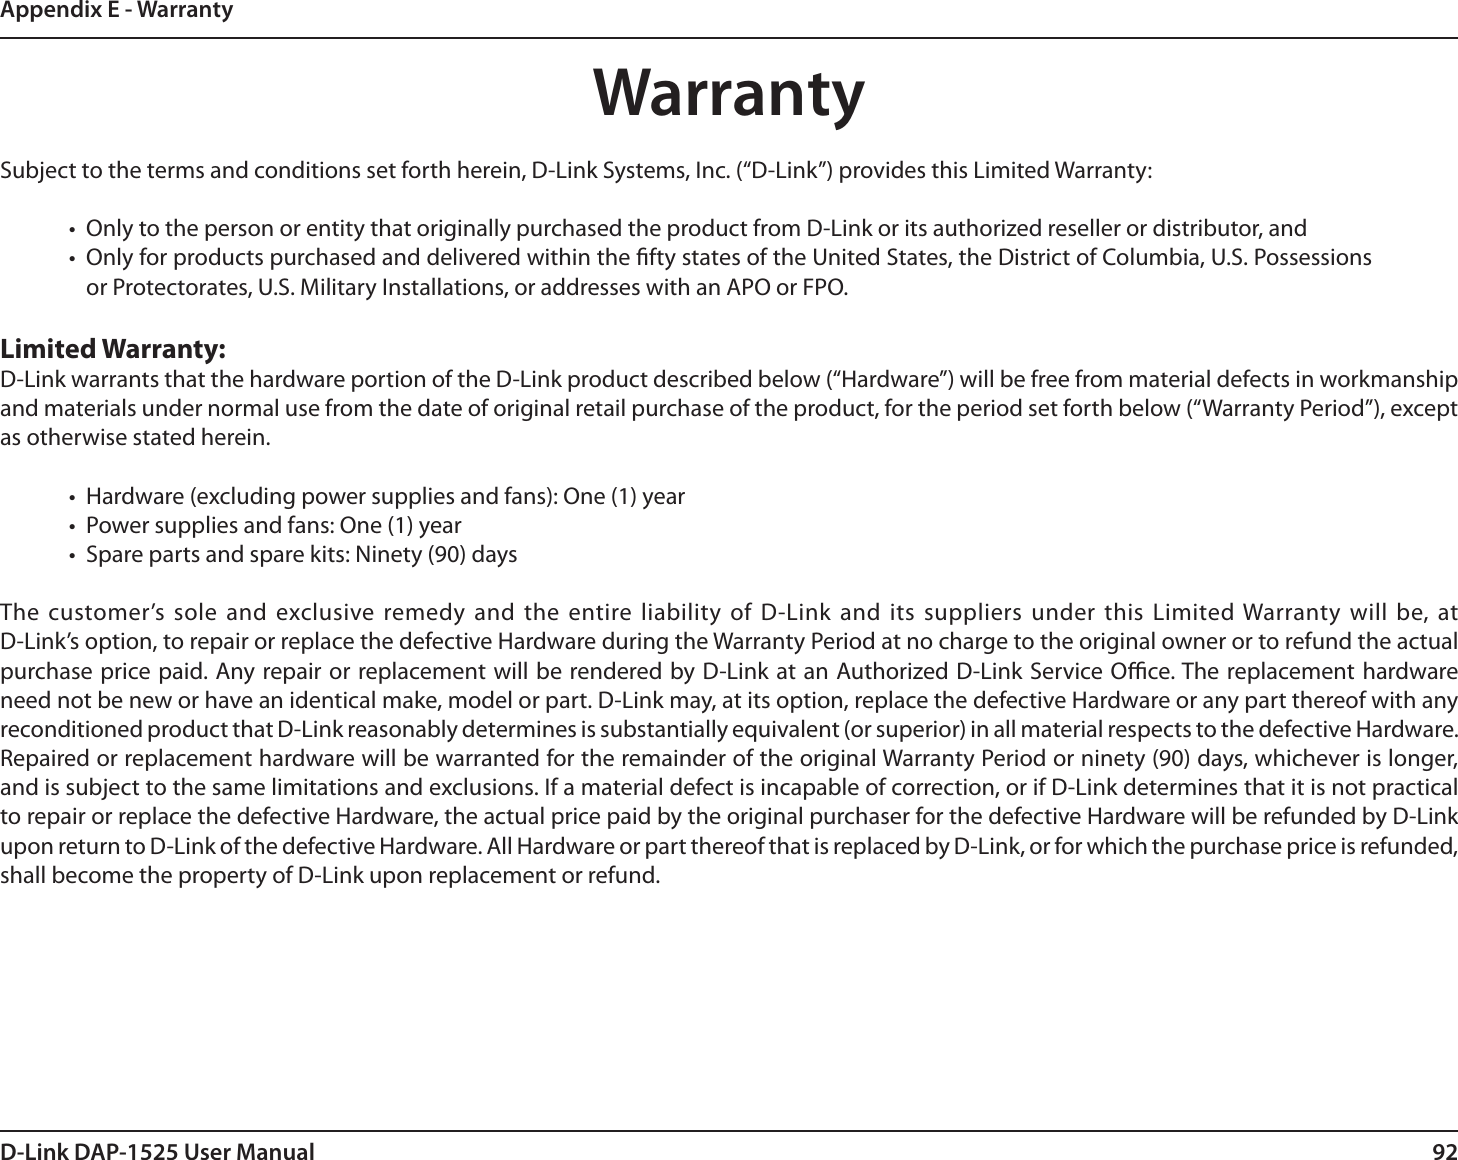 92D-Link DAP-1525 User ManualAppendix E - WarrantyWarrantySubject to the terms and conditions set forth herein, D-Link Systems, Inc. (“D-Link”) provides this Limited Warranty:•  Only to the person or entity that originally purchased the product from D-Link or its authorized reseller or distributor, and•  Only for products purchased and delivered within the fty states of the United States, the District of Columbia, U.S. Possessions or Protectorates, U.S. Military Installations, or addresses with an APO or FPO.Limited Warranty:D-Link warrants that the hardware portion of the D-Link product described below (“Hardware”) will be free from material defects in workmanship and materials under normal use from the date of original retail purchase of the product, for the period set forth below (“Warranty Period”), except as otherwise stated herein.•  Hardware (excluding power supplies and fans): One (1) year•  Power supplies and fans: One (1) year•  Spare parts and spare kits: Ninety (90) daysThe customer’s sole and exclusive remedy and the entire liability of D-Link and its suppliers under this Limited Warranty will be, at  D-Link’s option, to repair or replace the defective Hardware during the Warranty Period at no charge to the original owner or to refund the actual purchase price paid. Any repair or replacement will be rendered by D-Link at an Authorized D-Link Service Oce. The replacement hardware need not be new or have an identical make, model or part. D-Link may, at its option, replace the defective Hardware or any part thereof with any reconditioned product that D-Link reasonably determines is substantially equivalent (or superior) in all material respects to the defective Hardware. Repaired or replacement hardware will be warranted for the remainder of the original Warranty Period or ninety (90) days, whichever is longer, and is subject to the same limitations and exclusions. If a material defect is incapable of correction, or if D-Link determines that it is not practical to repair or replace the defective Hardware, the actual price paid by the original purchaser for the defective Hardware will be refunded by D-Link upon return to D-Link of the defective Hardware. All Hardware or part thereof that is replaced by D-Link, or for which the purchase price is refunded, shall become the property of D-Link upon replacement or refund.